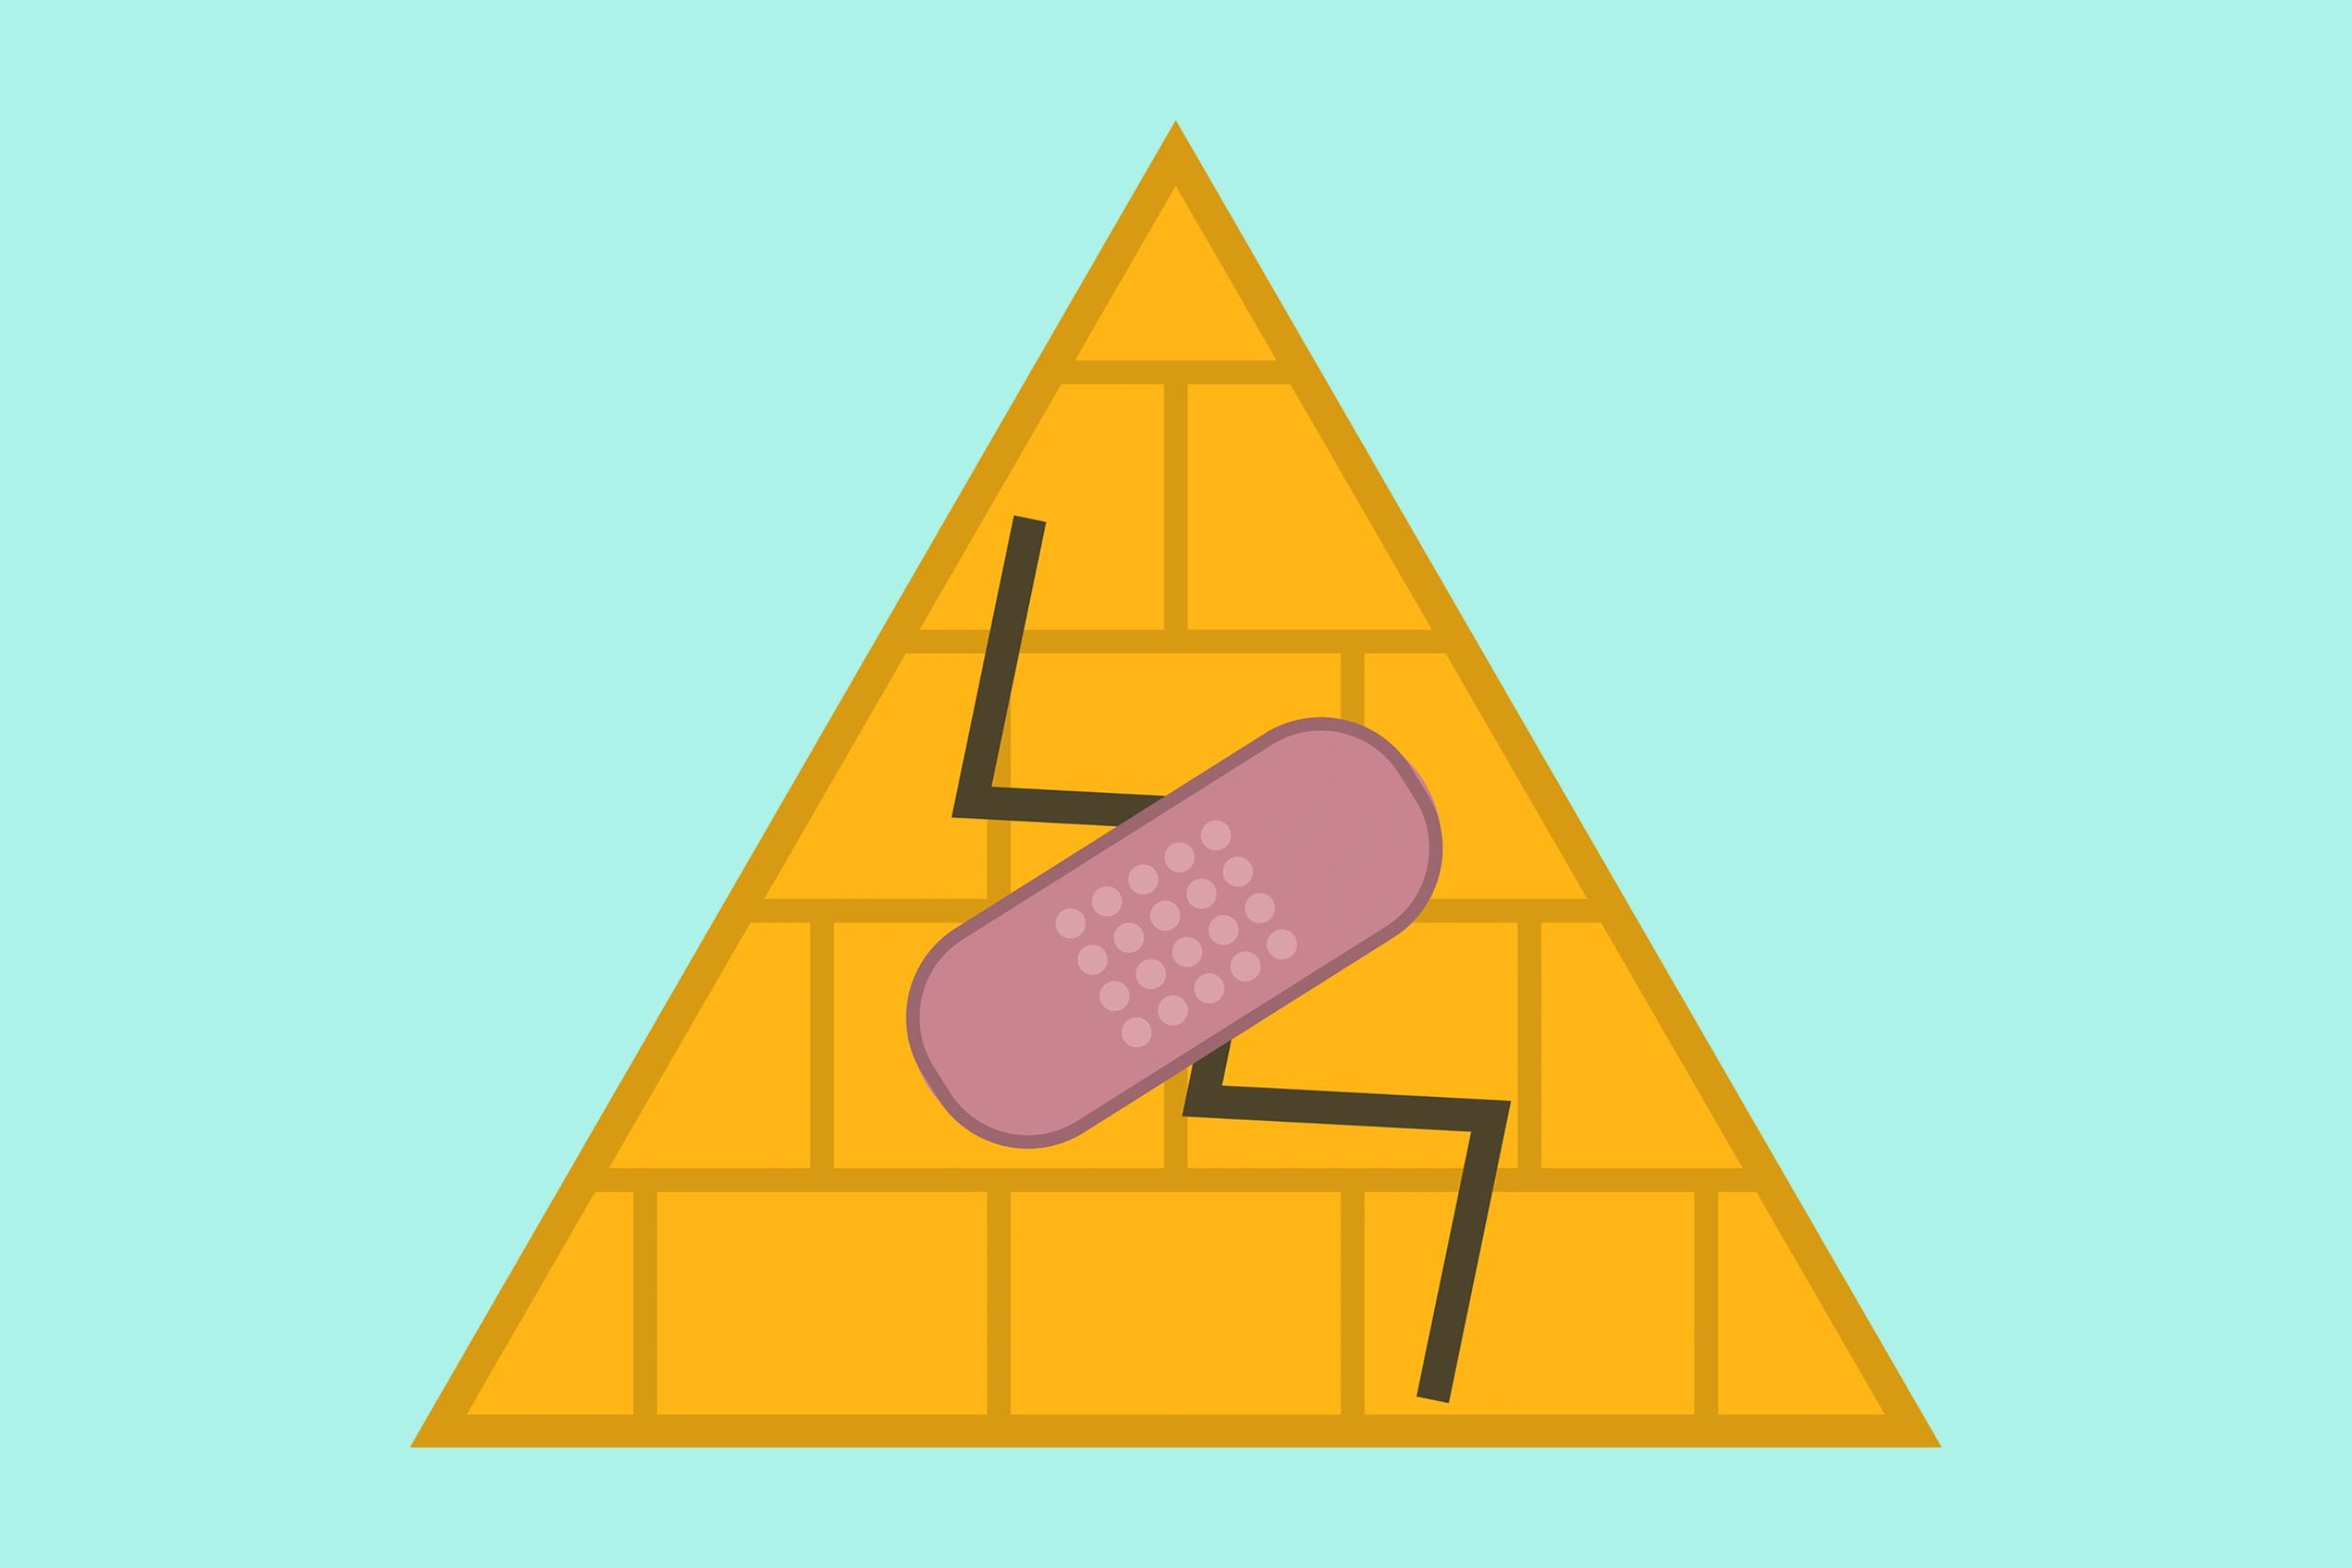 The podcast logo, an illustration of a cracked pyramid with a band-aid on it